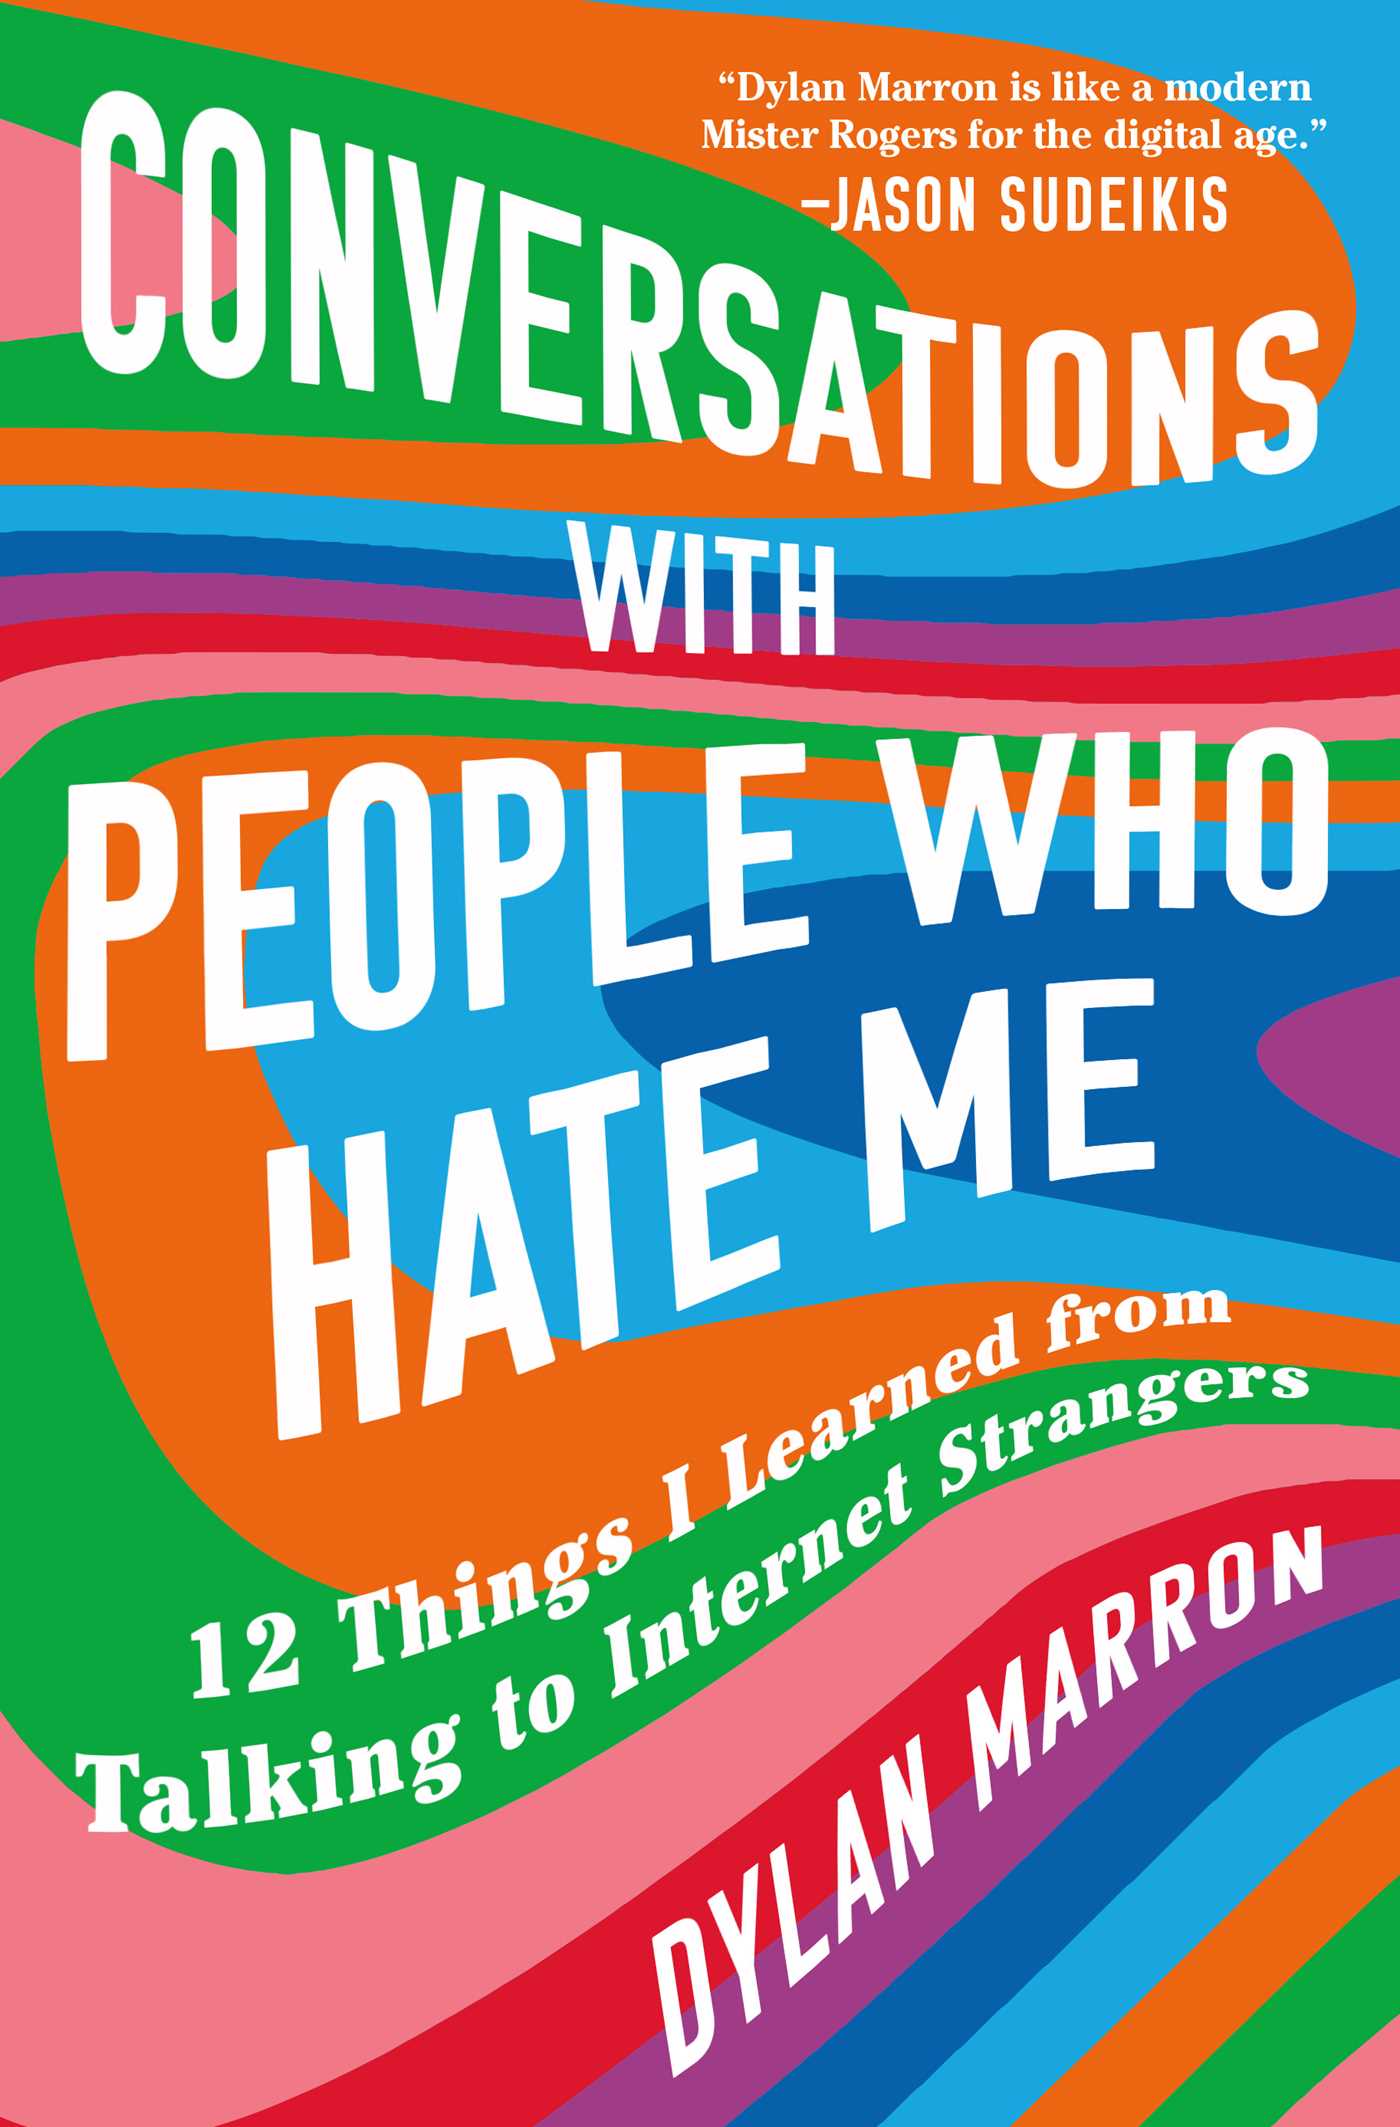 Book Launch: Conversations With People Who Hate Me by Dylan Marron in conversation with Jo Firestone